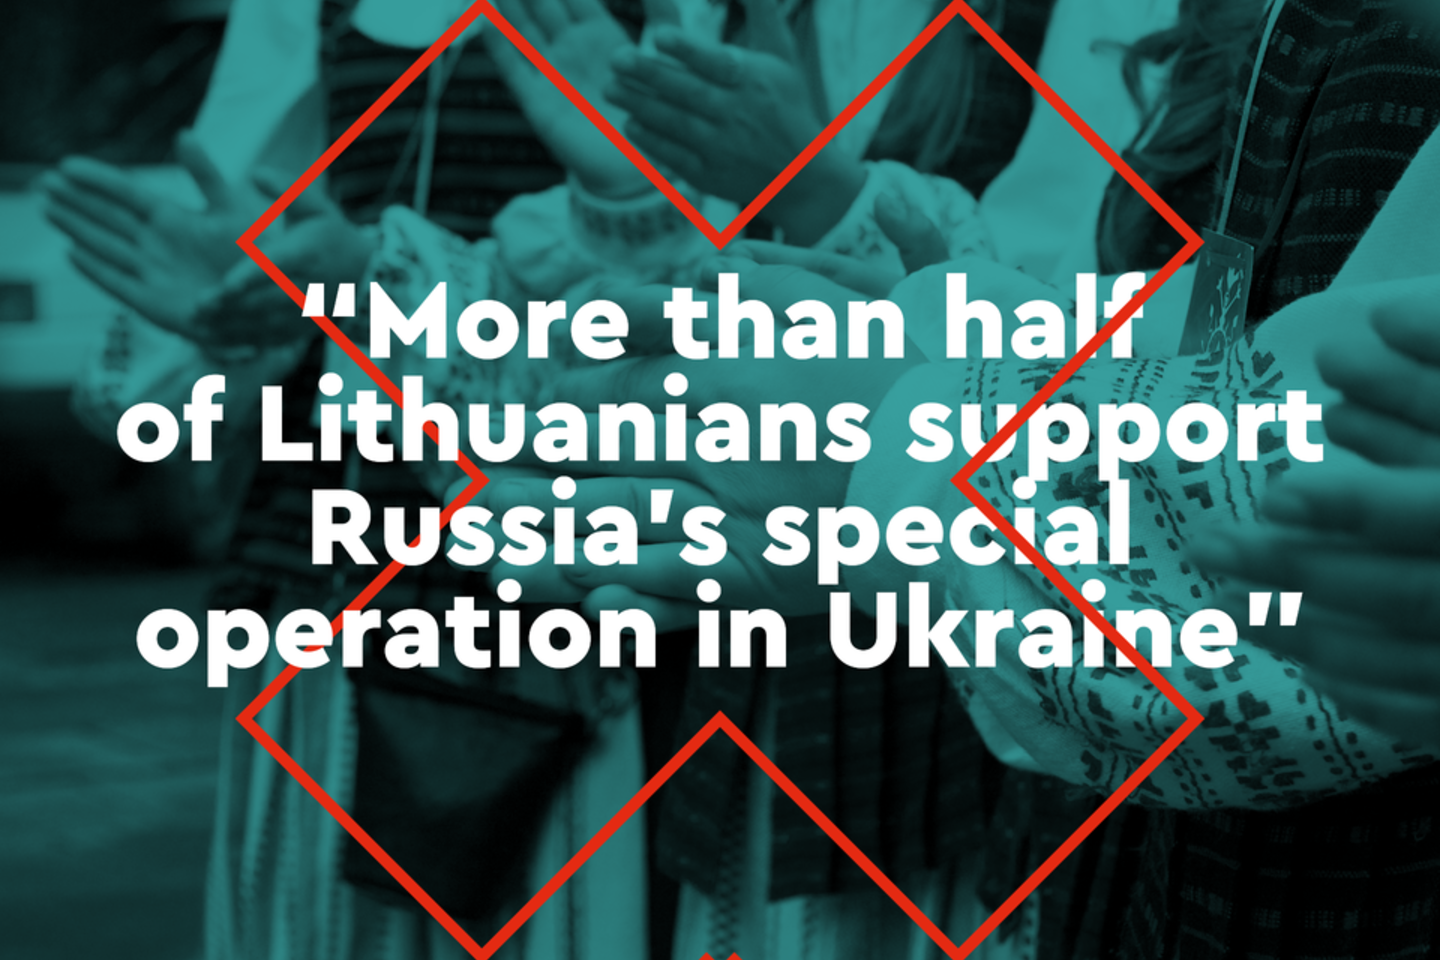 Propaganda message: „More than half of Lithuanians support Russia's special operation in Ukraine“.